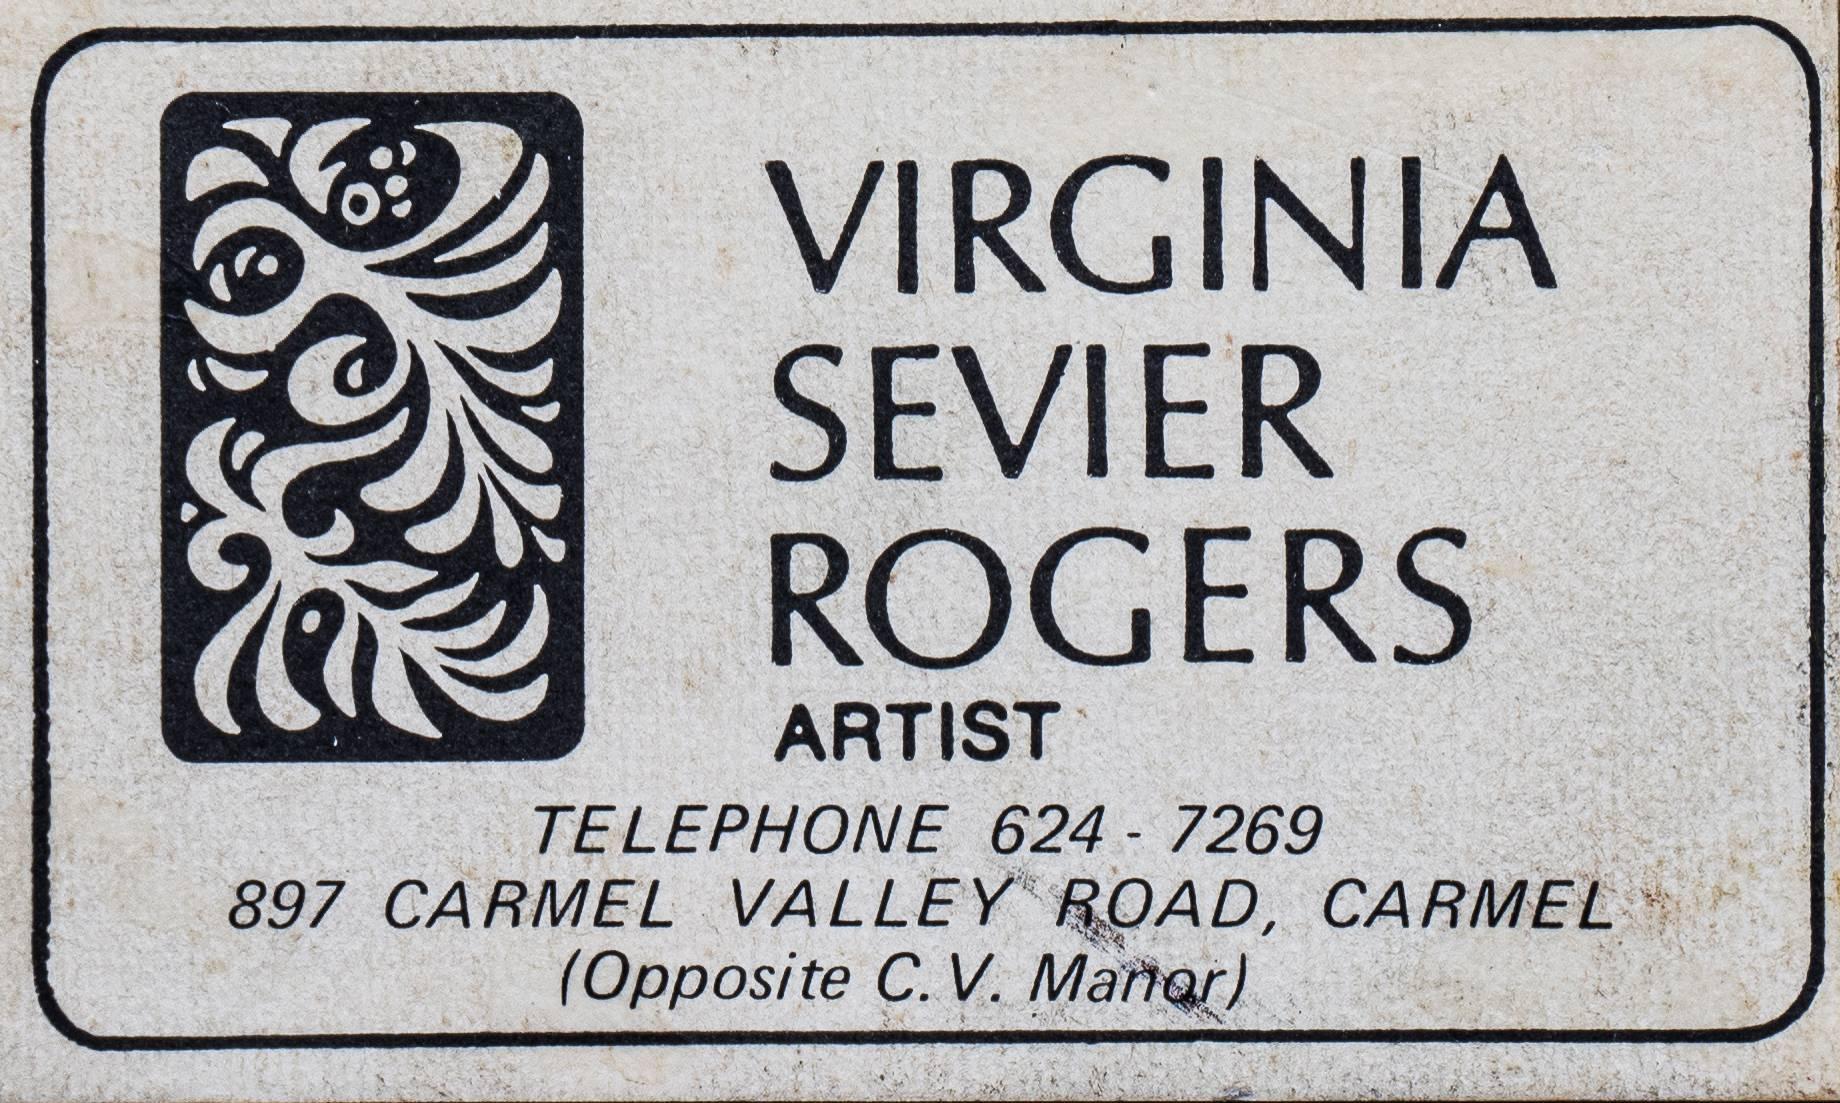 Signed upper right with monogram, 'V.S.R.' for Virginia Sevier Rogers (American, 1916-2015) and dated 1956.

Virginia Sevier Rogers studied with Hugh Breckenridge at the Philadelphia Academy of Fine Arts (1934) and earned her M.A. at UC Berkeley. A